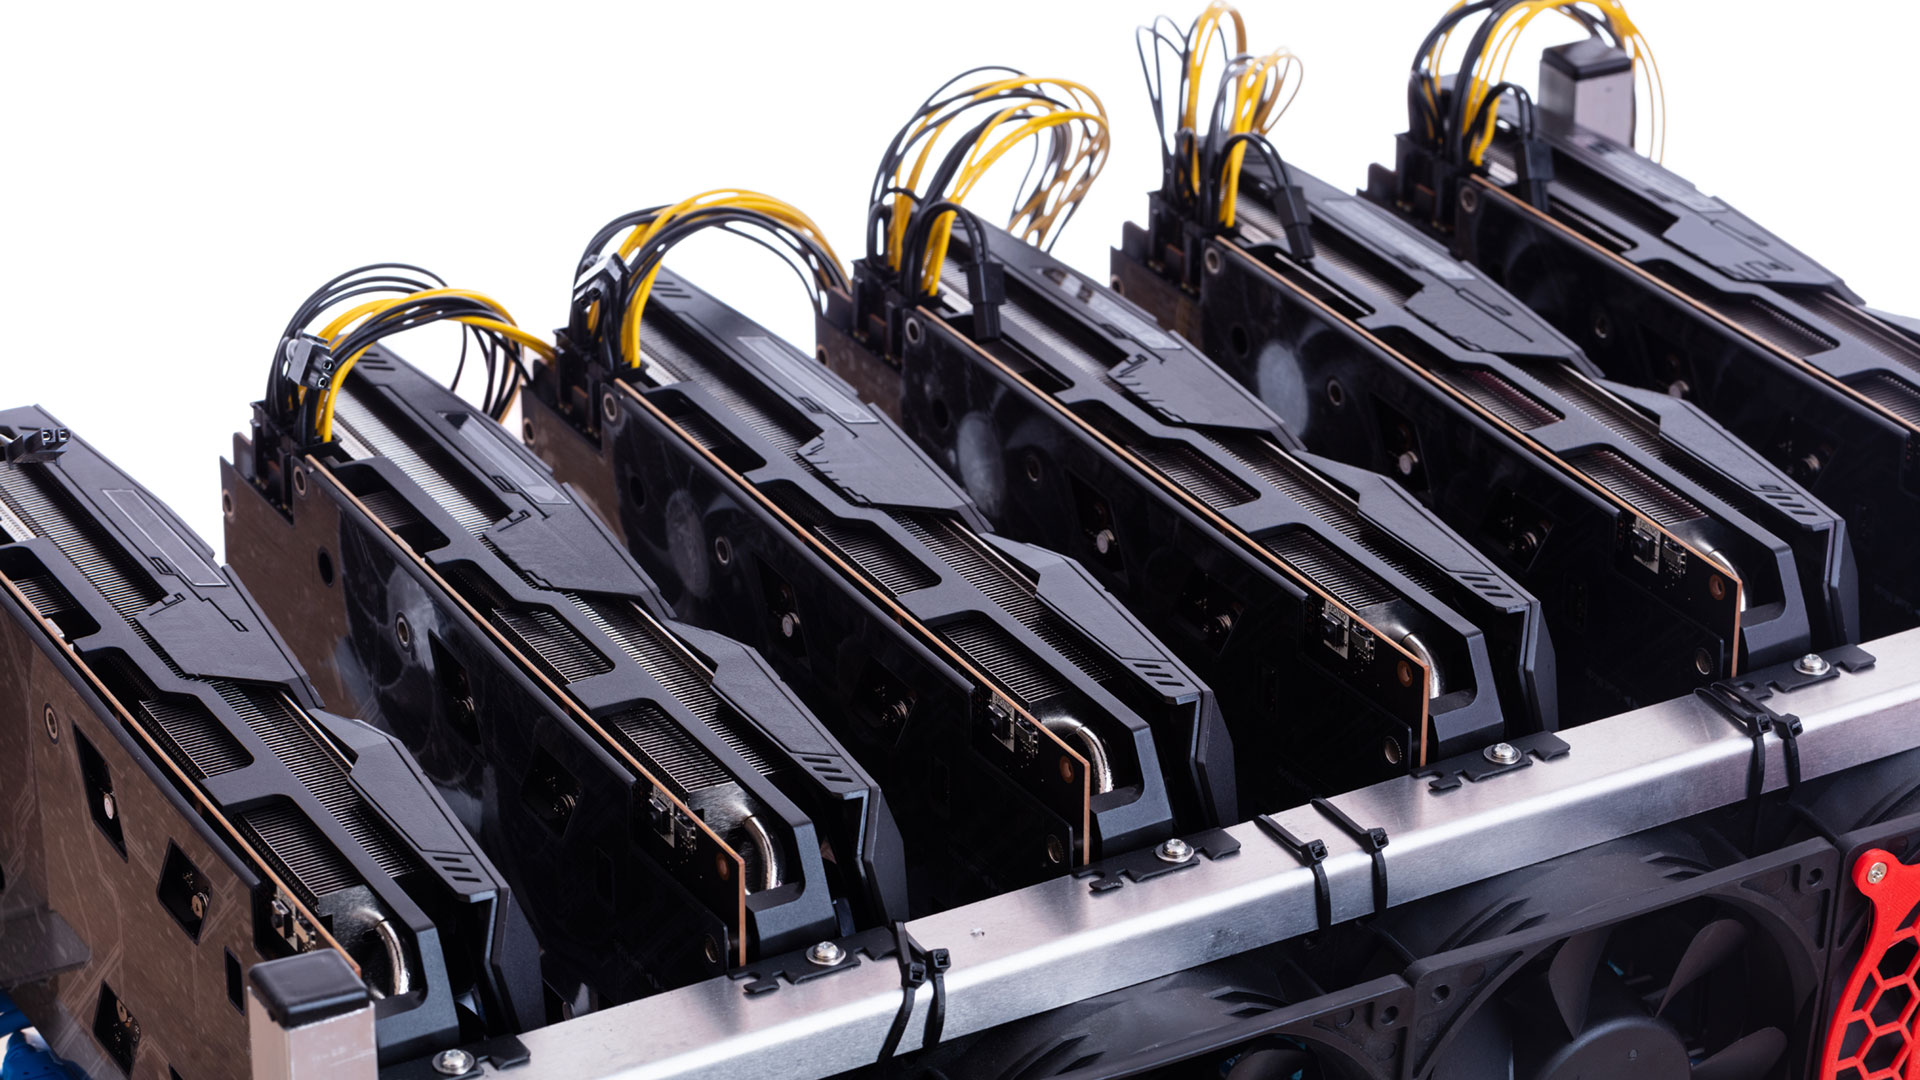 How to Optimize Your GPU for Ethereum Mining | Tom's Hardware